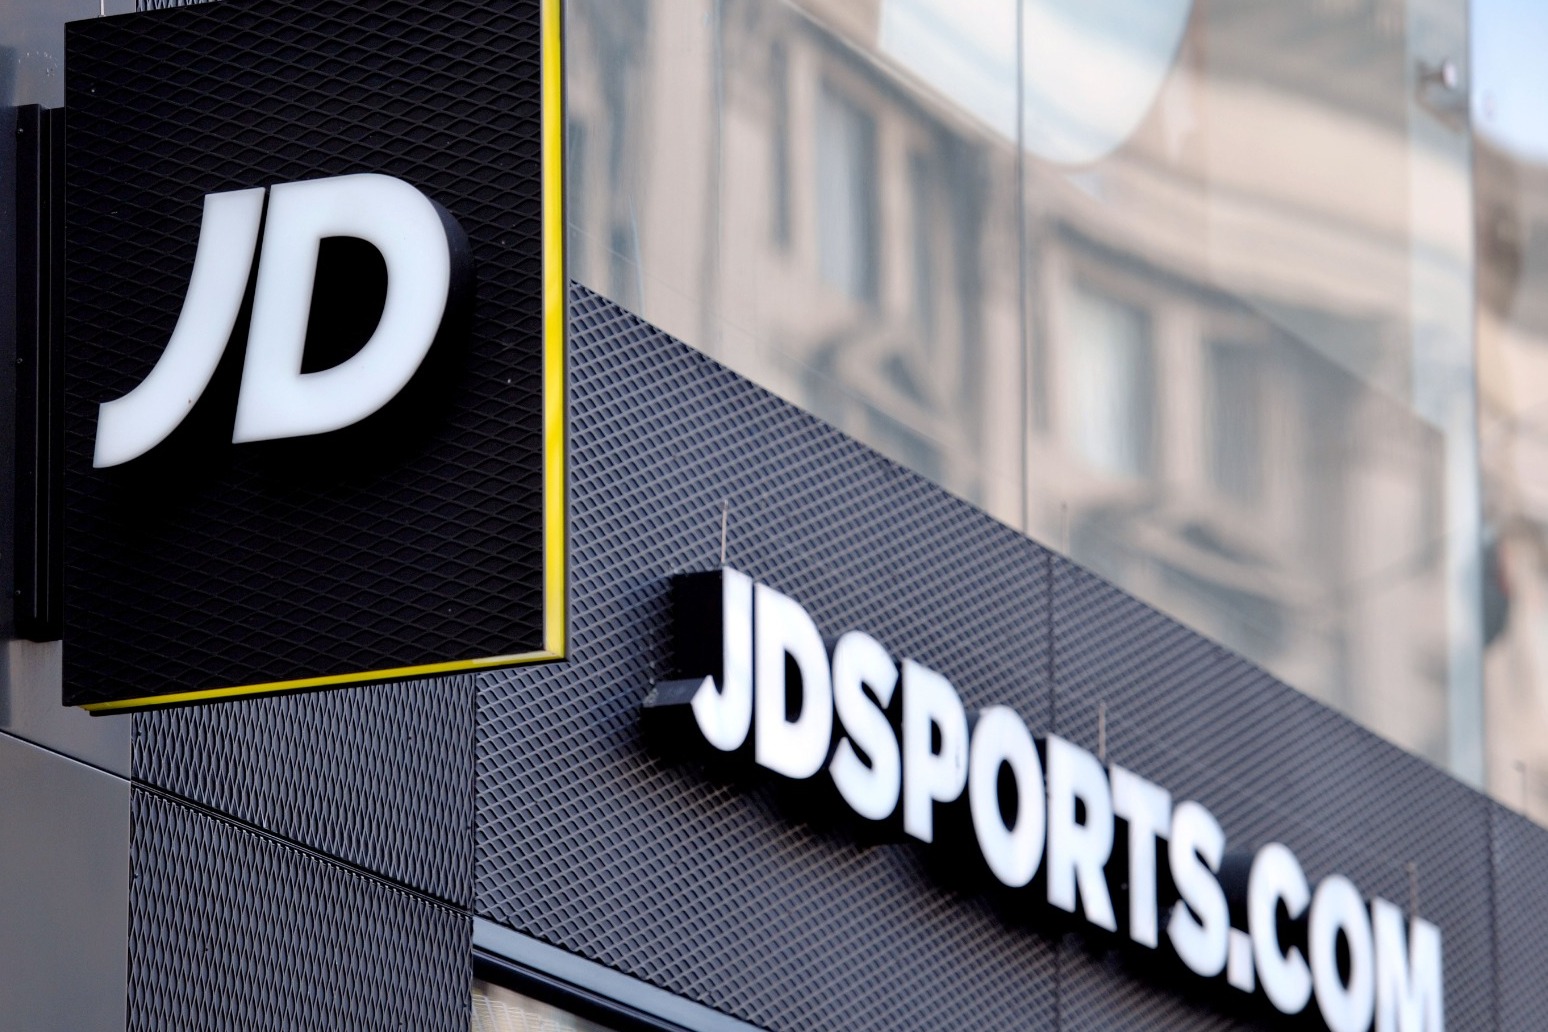 JD Sports, Elite Sports and Rangers Football Club fixed kit prices, says CMA 